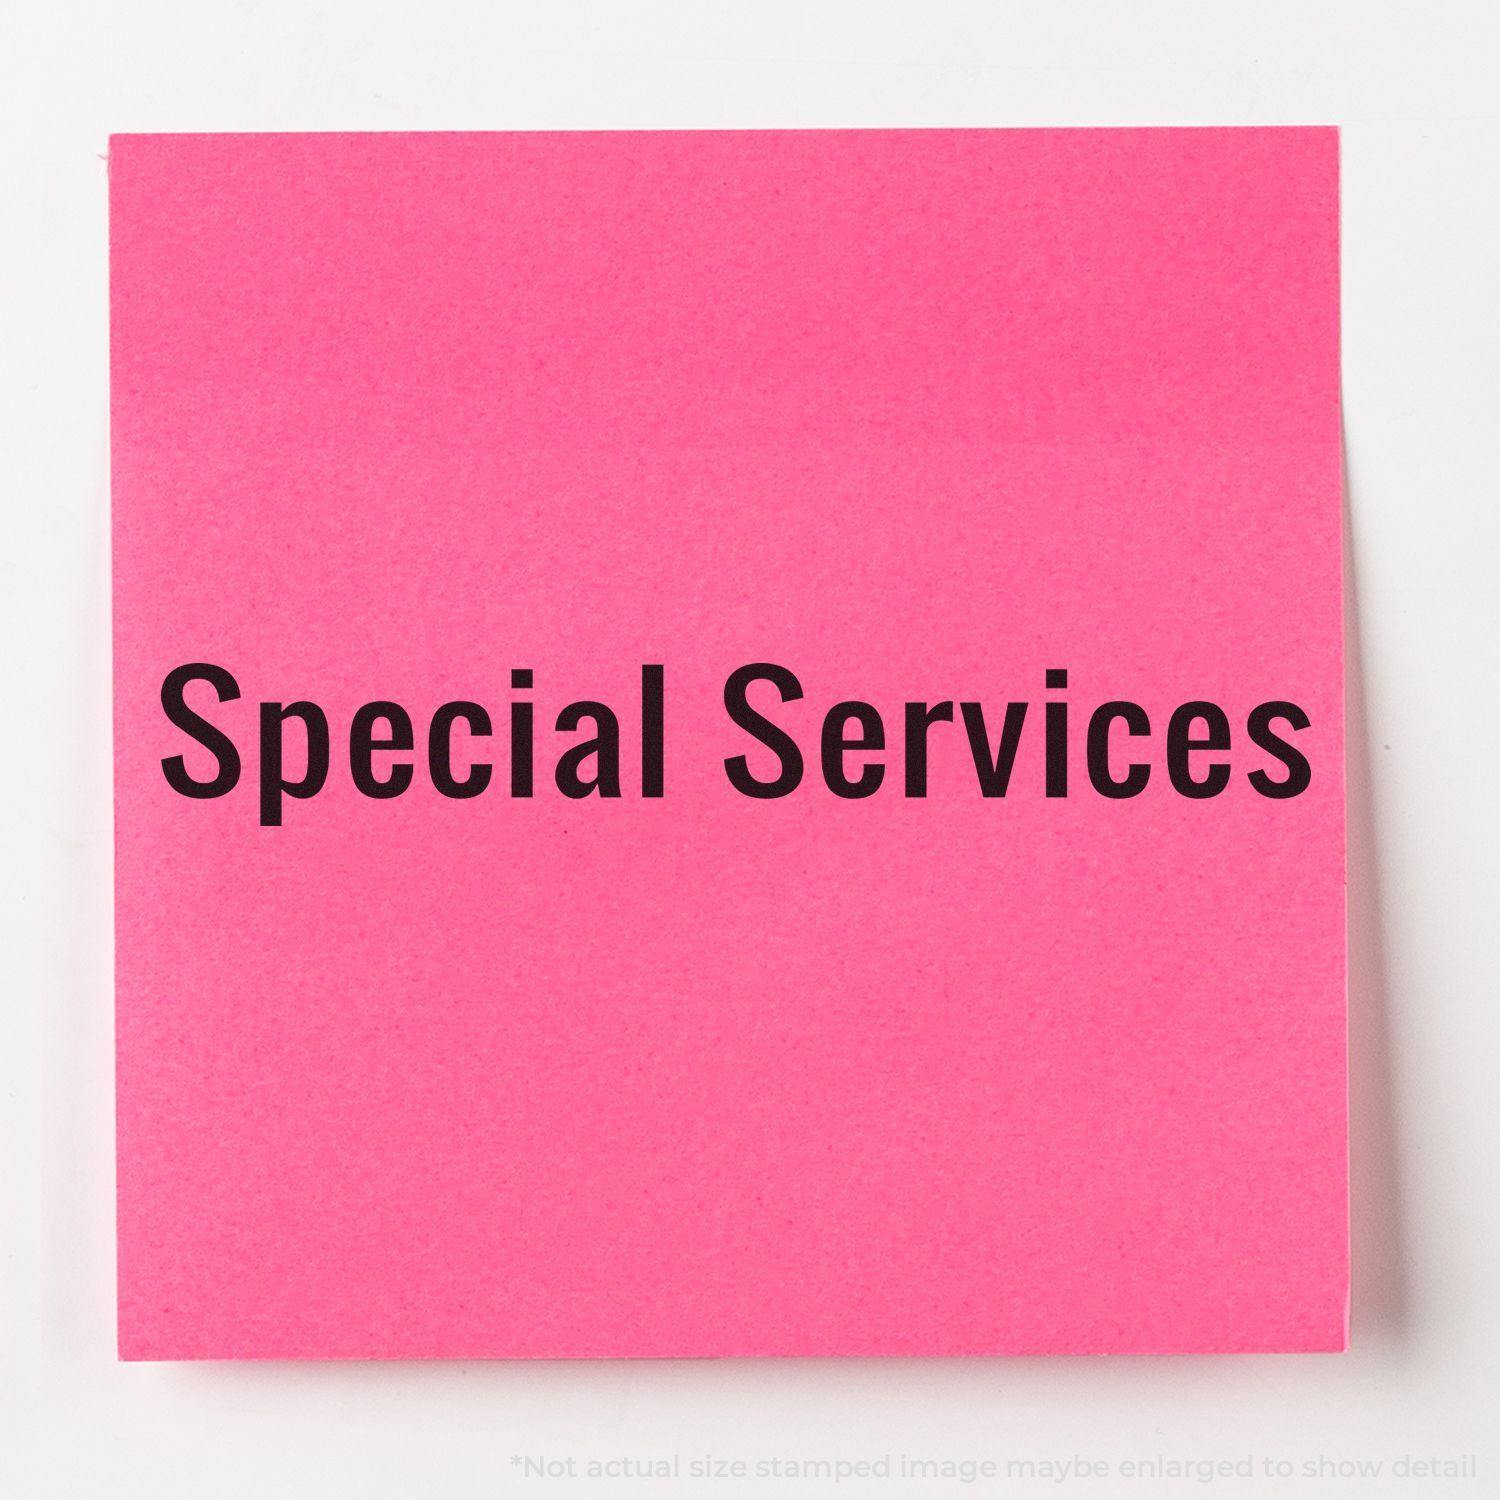 A stock office rubber stamp with a stamped image showing how the text "SPECIAL SERVICES" in a large font is displayed after stamping.